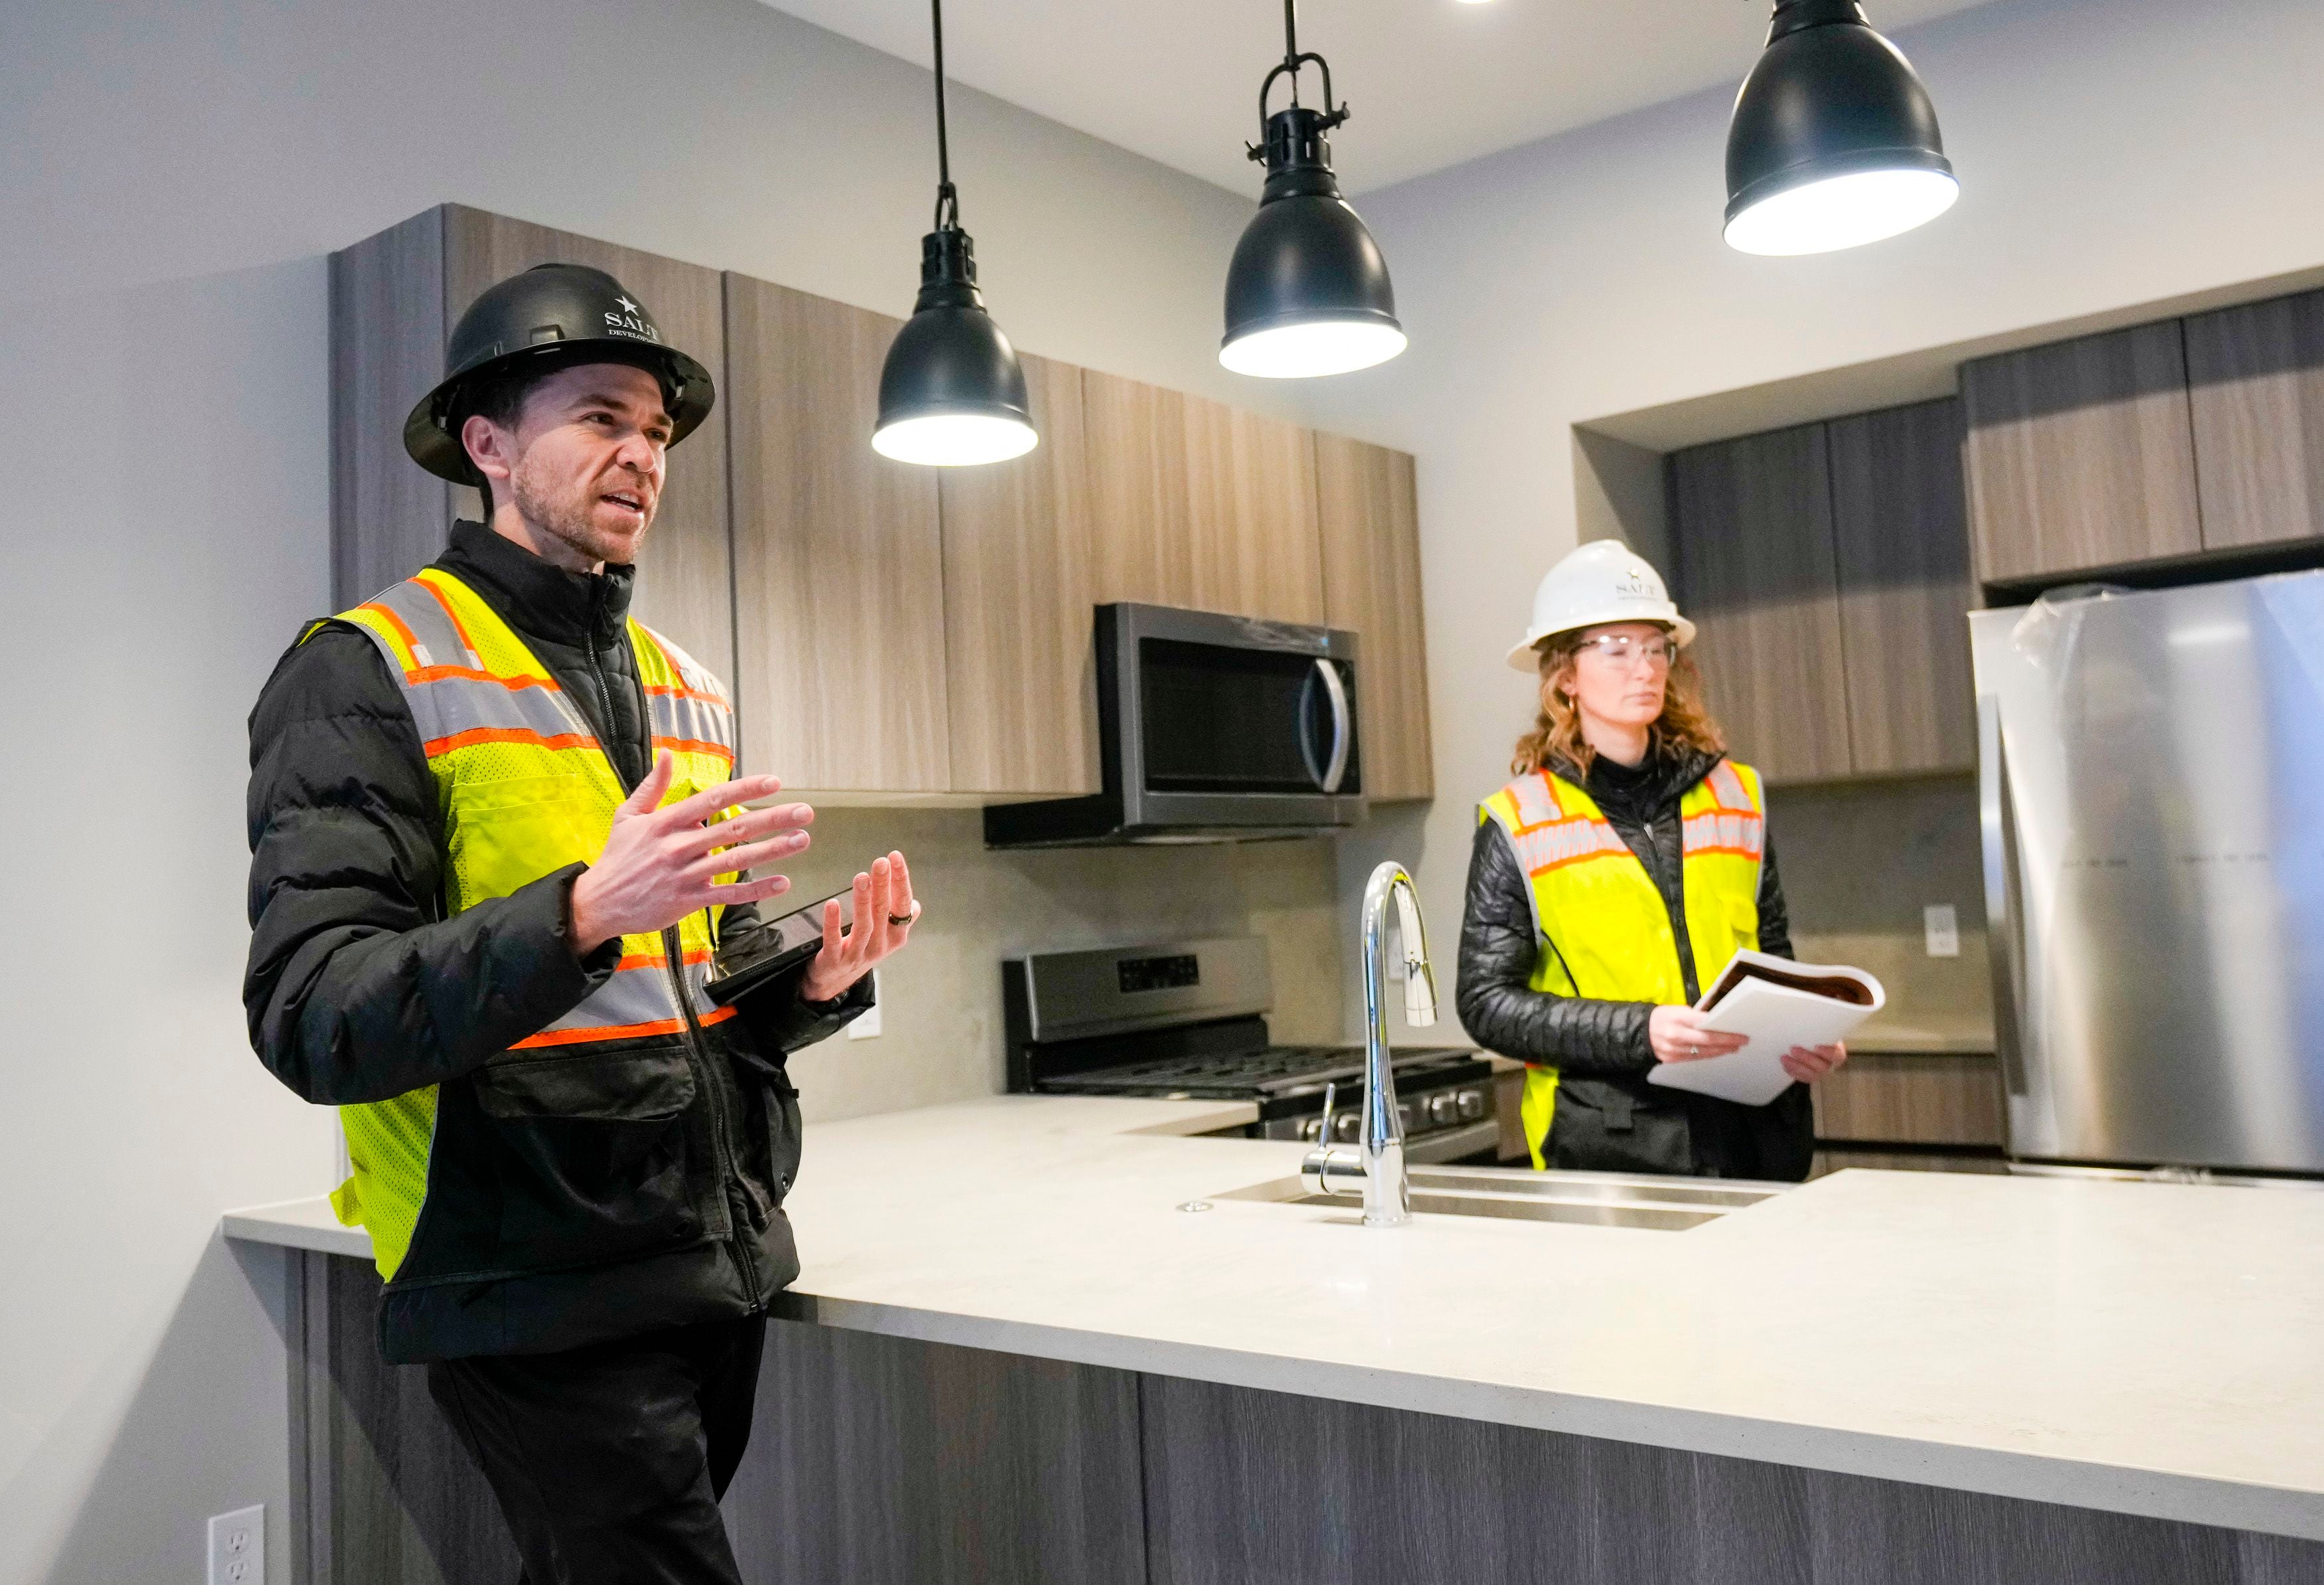 (Bethany Baker | The Salt Lake Tribune) Austin Vegh, left, the community manager for Salt Lake Crossing, speaks during a tour at Salt Lake Crossing, a new apartment complex set to open in May, in downtown Salt Lake City on Friday, March 8, 2024.